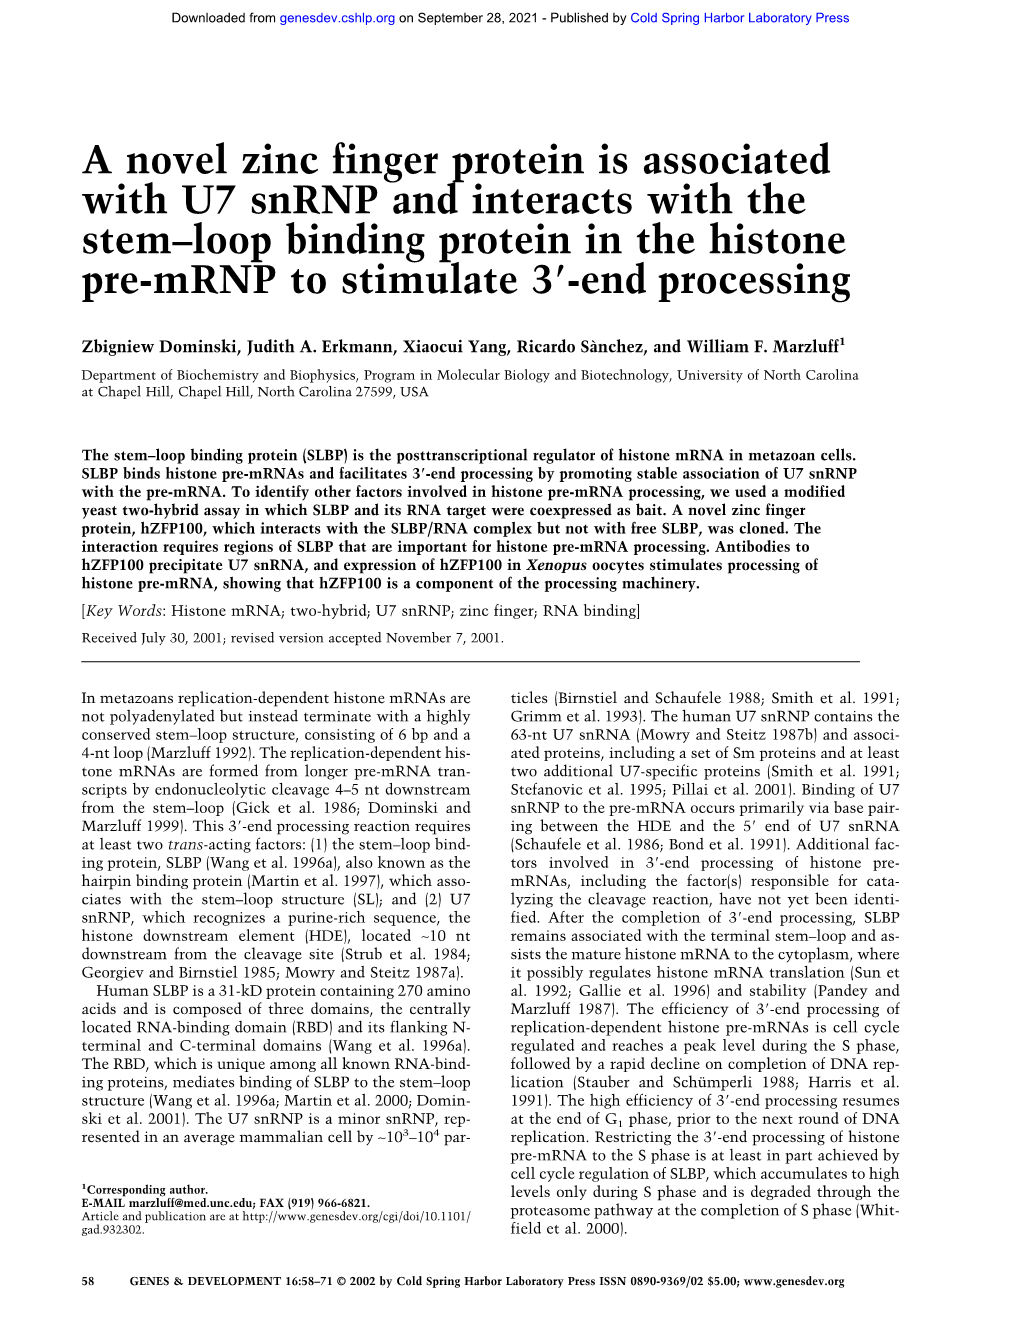 A Novel Zinc Finger Protein Is Associated with U7 Snrnp and Interacts with the Stem–Loop Binding Protein in the Histone Pre-Mrnp to Stimulate 3؅-End Processing